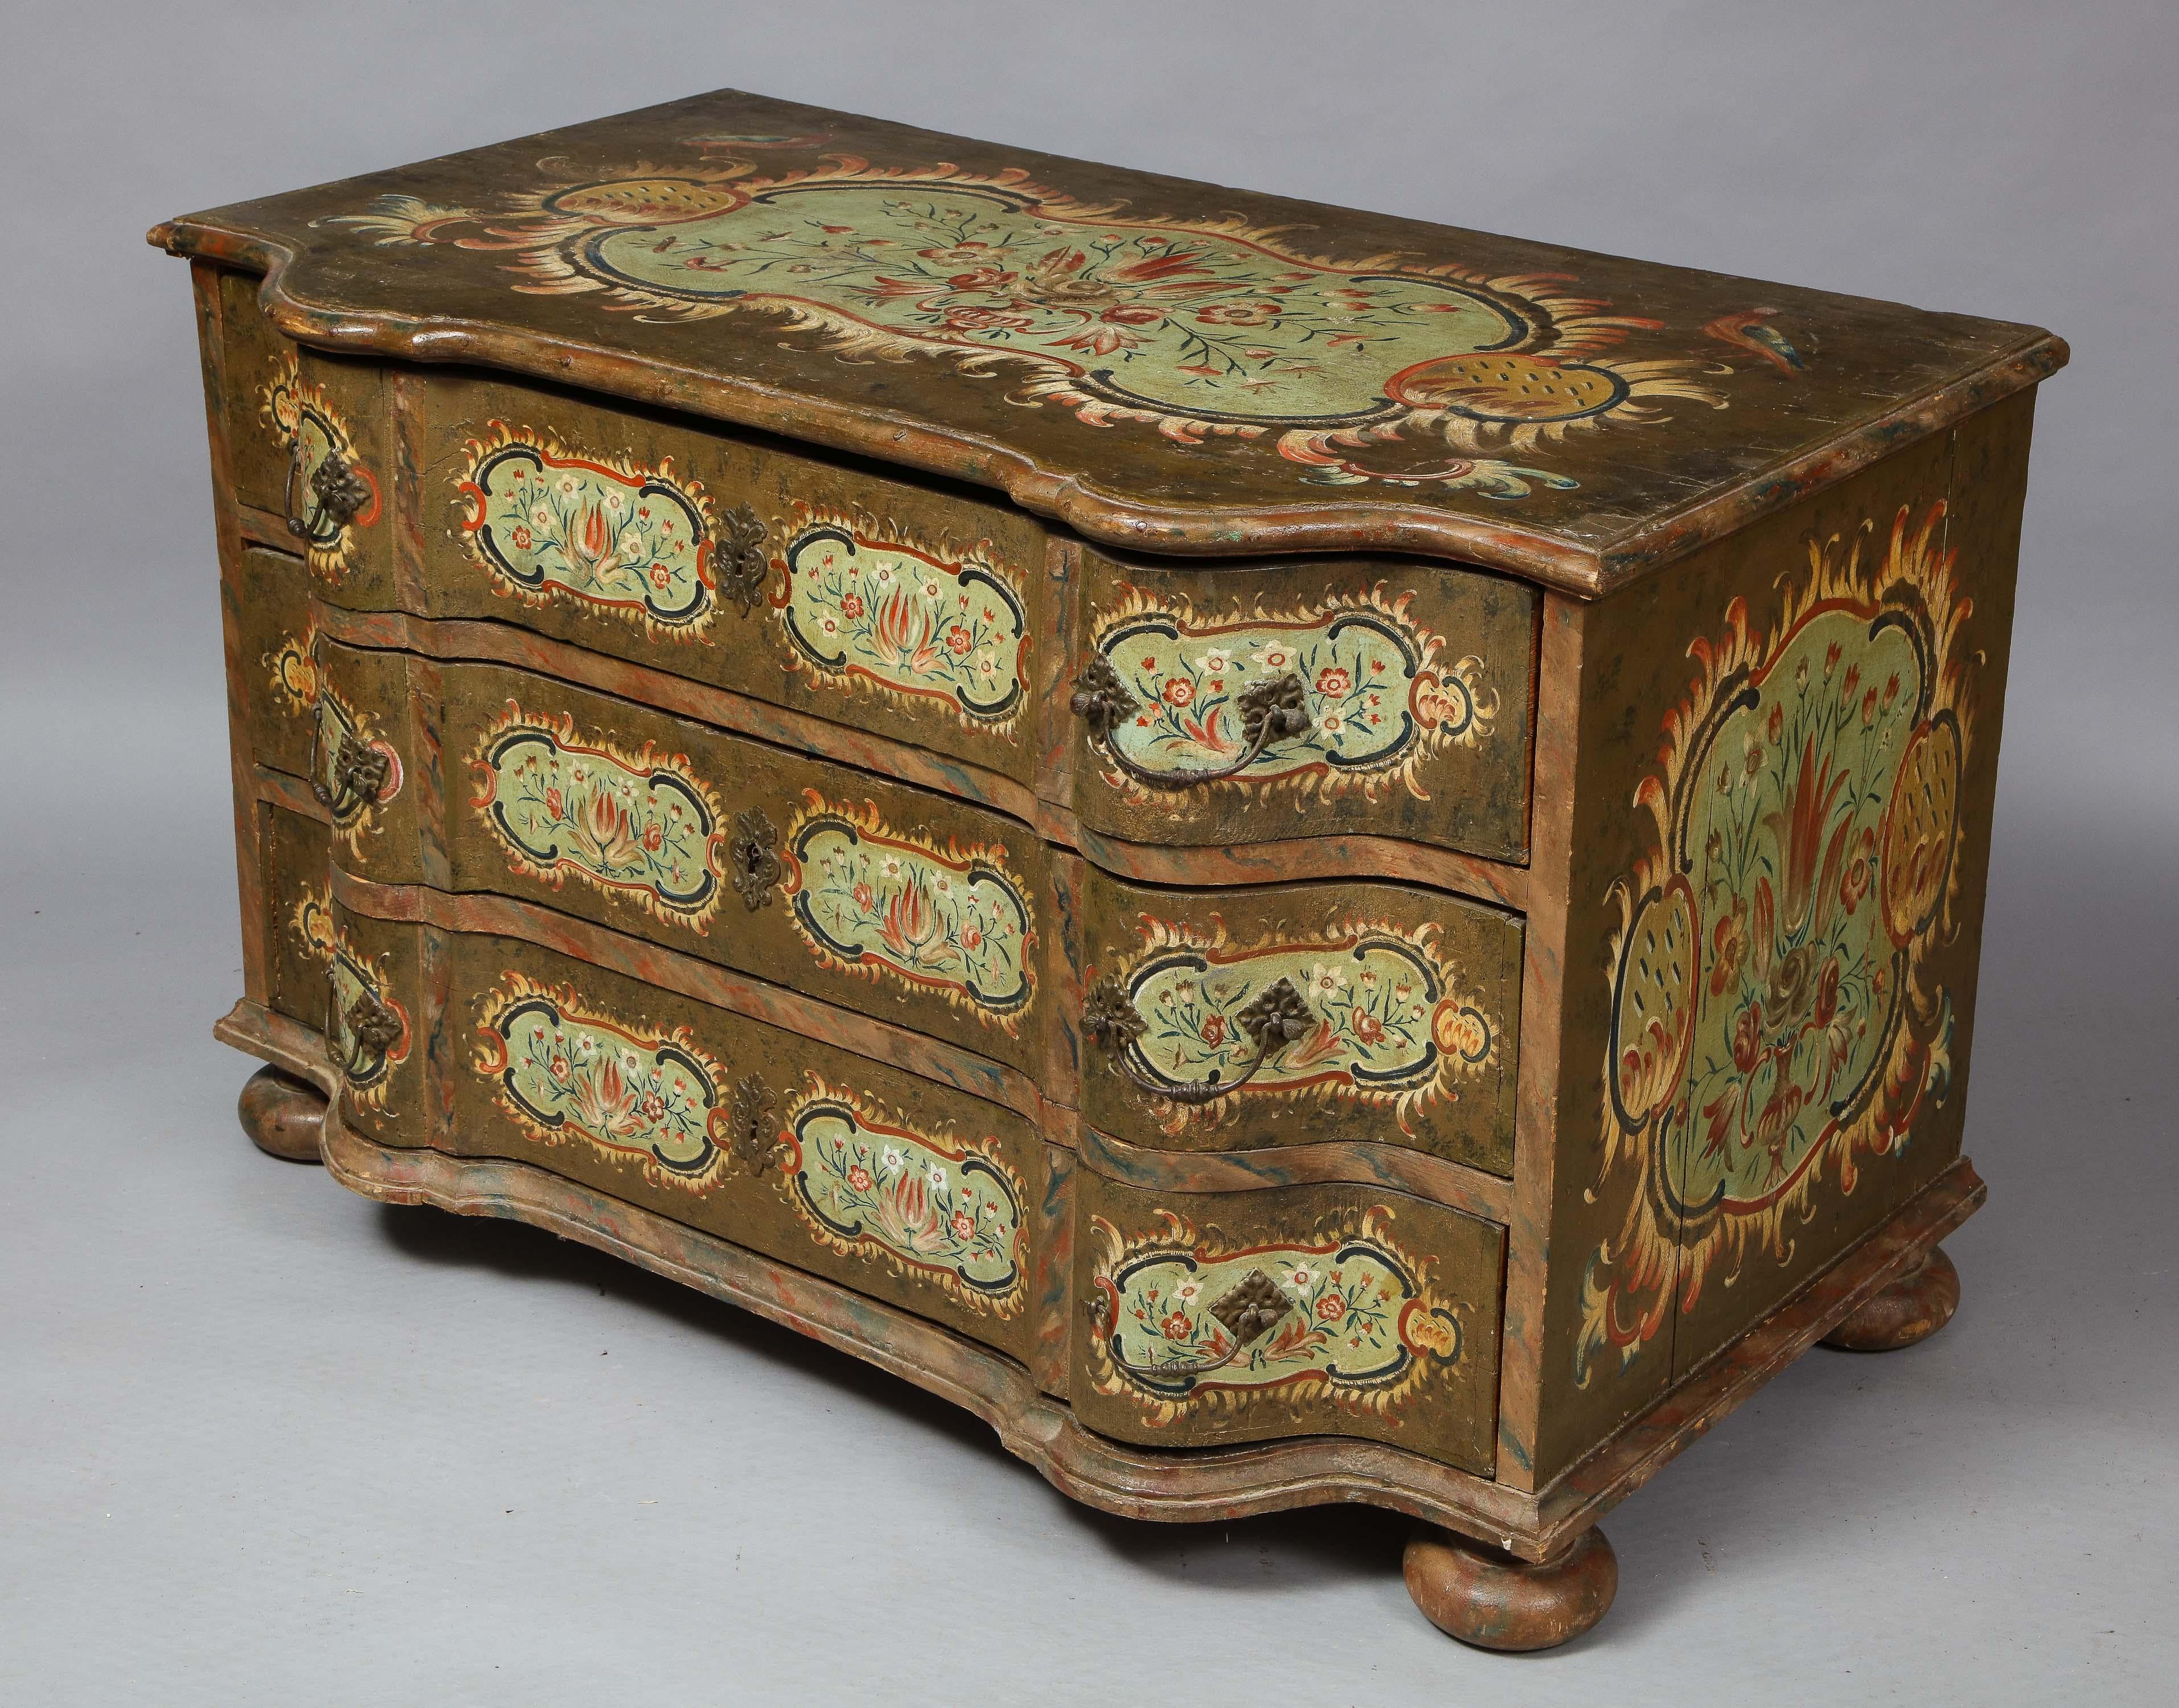 Very fine 18th century painted three drawer commode of baroque form, the top with foliate painting within a rococo cartouche surmounted with birds, over three drawers each with four similarly decorated panels and having original wrought iron